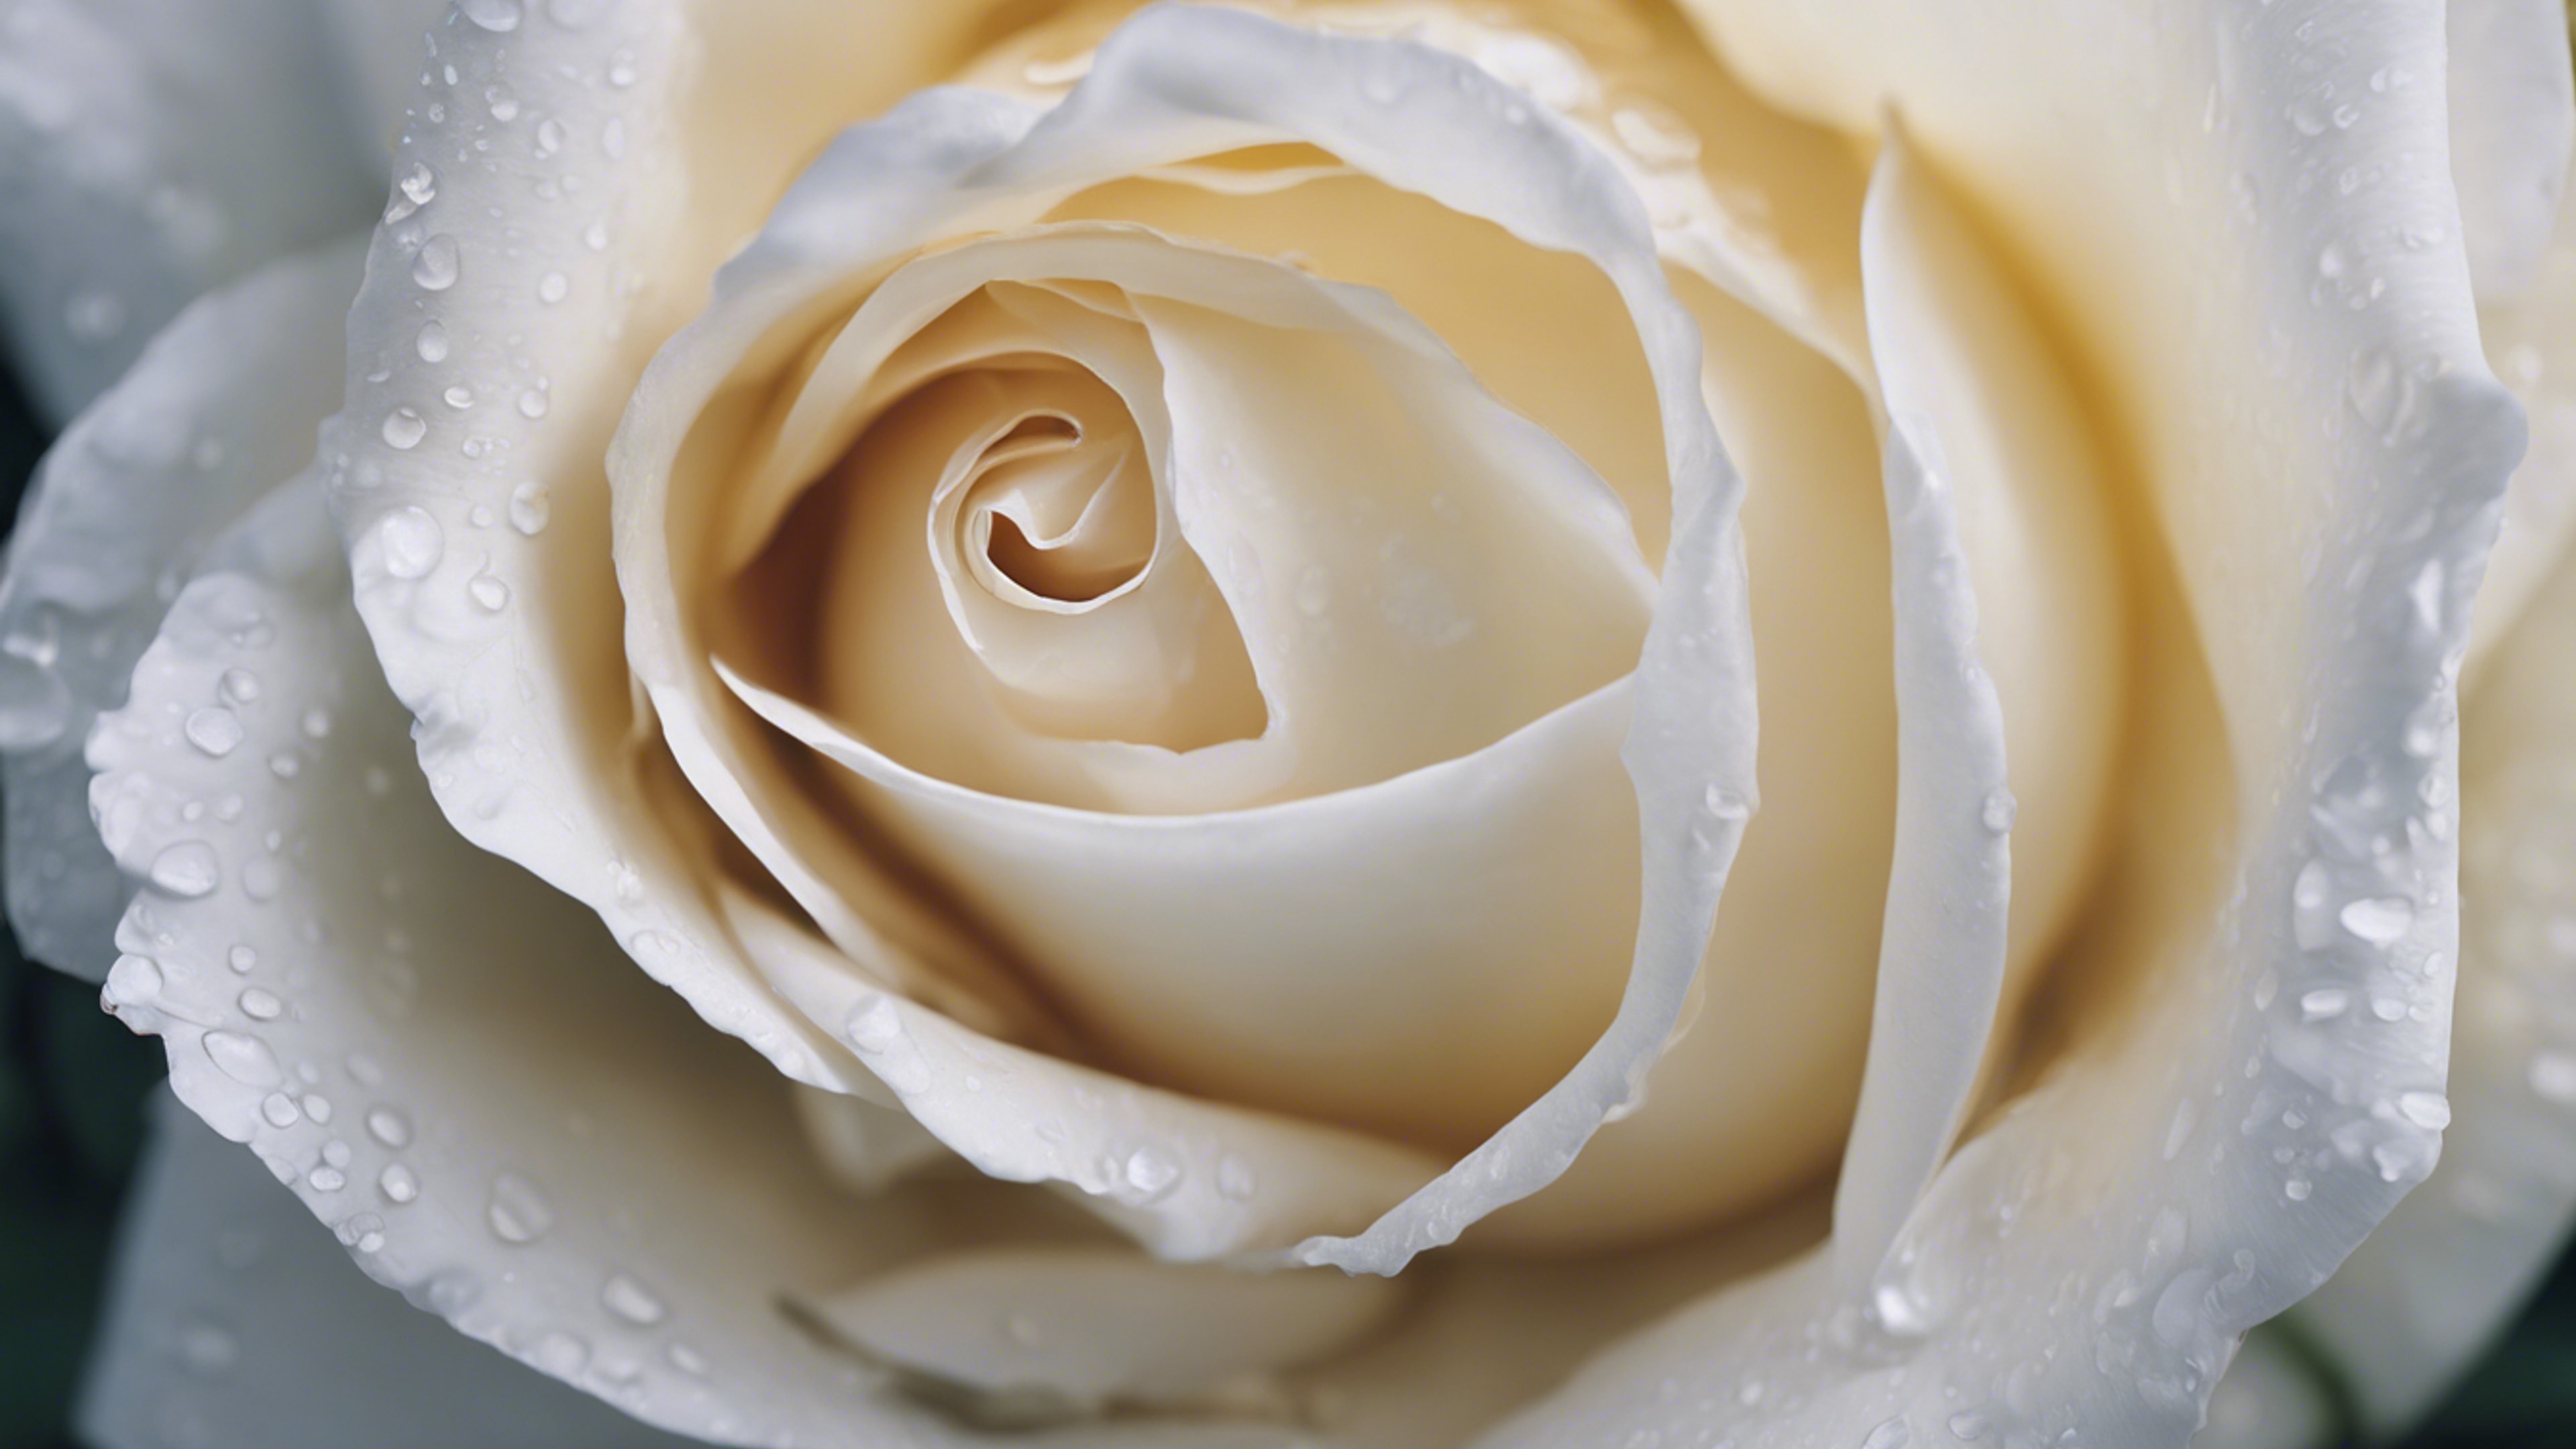 Zoomed view of the velvety petals of a white rose. Tapet[9ebd1bf4e1a74c36ba13]